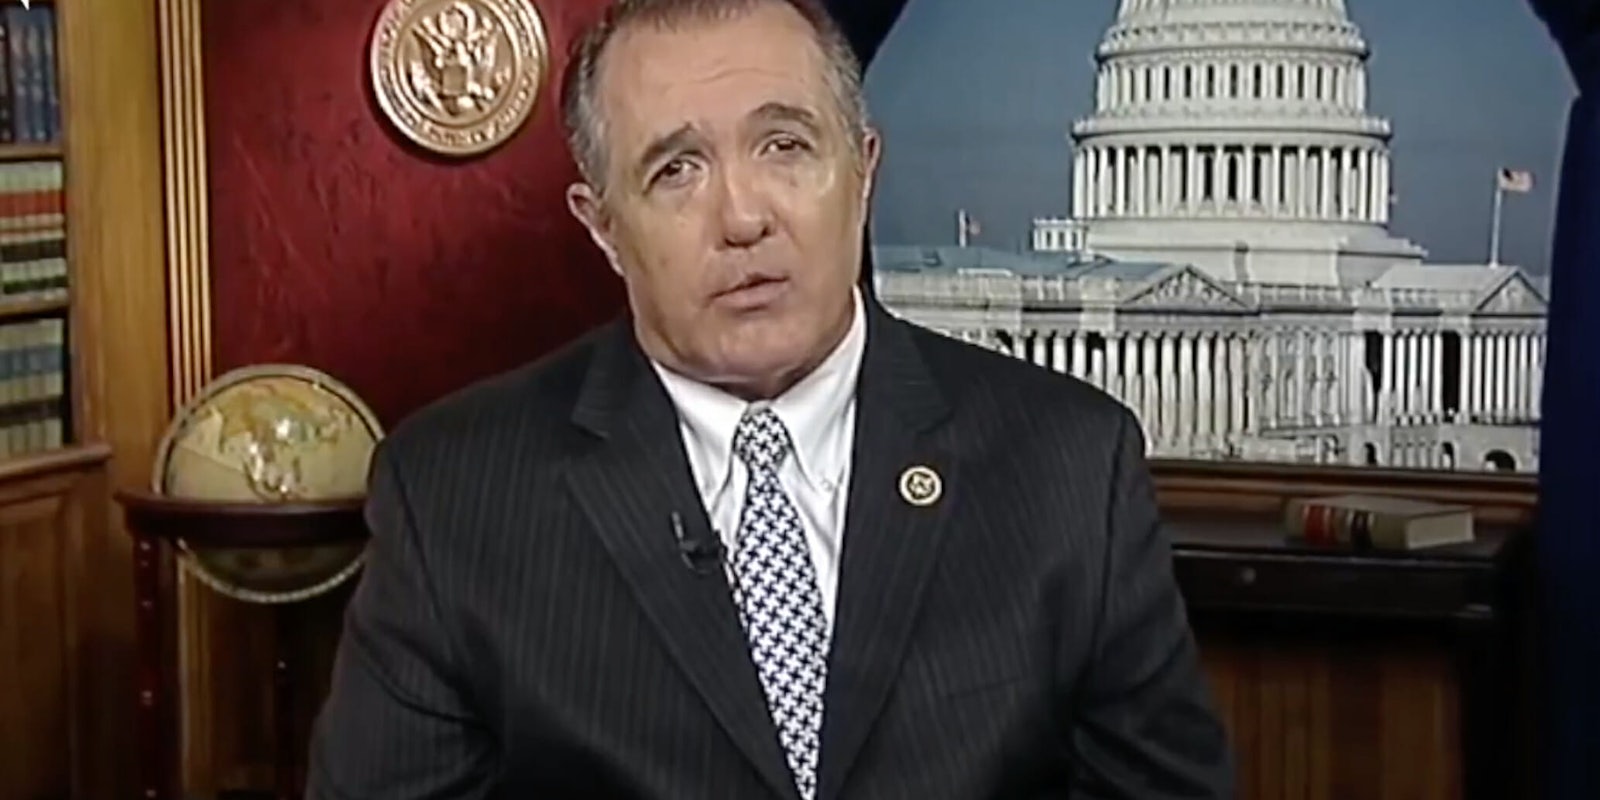 Trent Franks announced his plan to resign from Congress Thursday following 'discussions of surrogacy' with staffers.